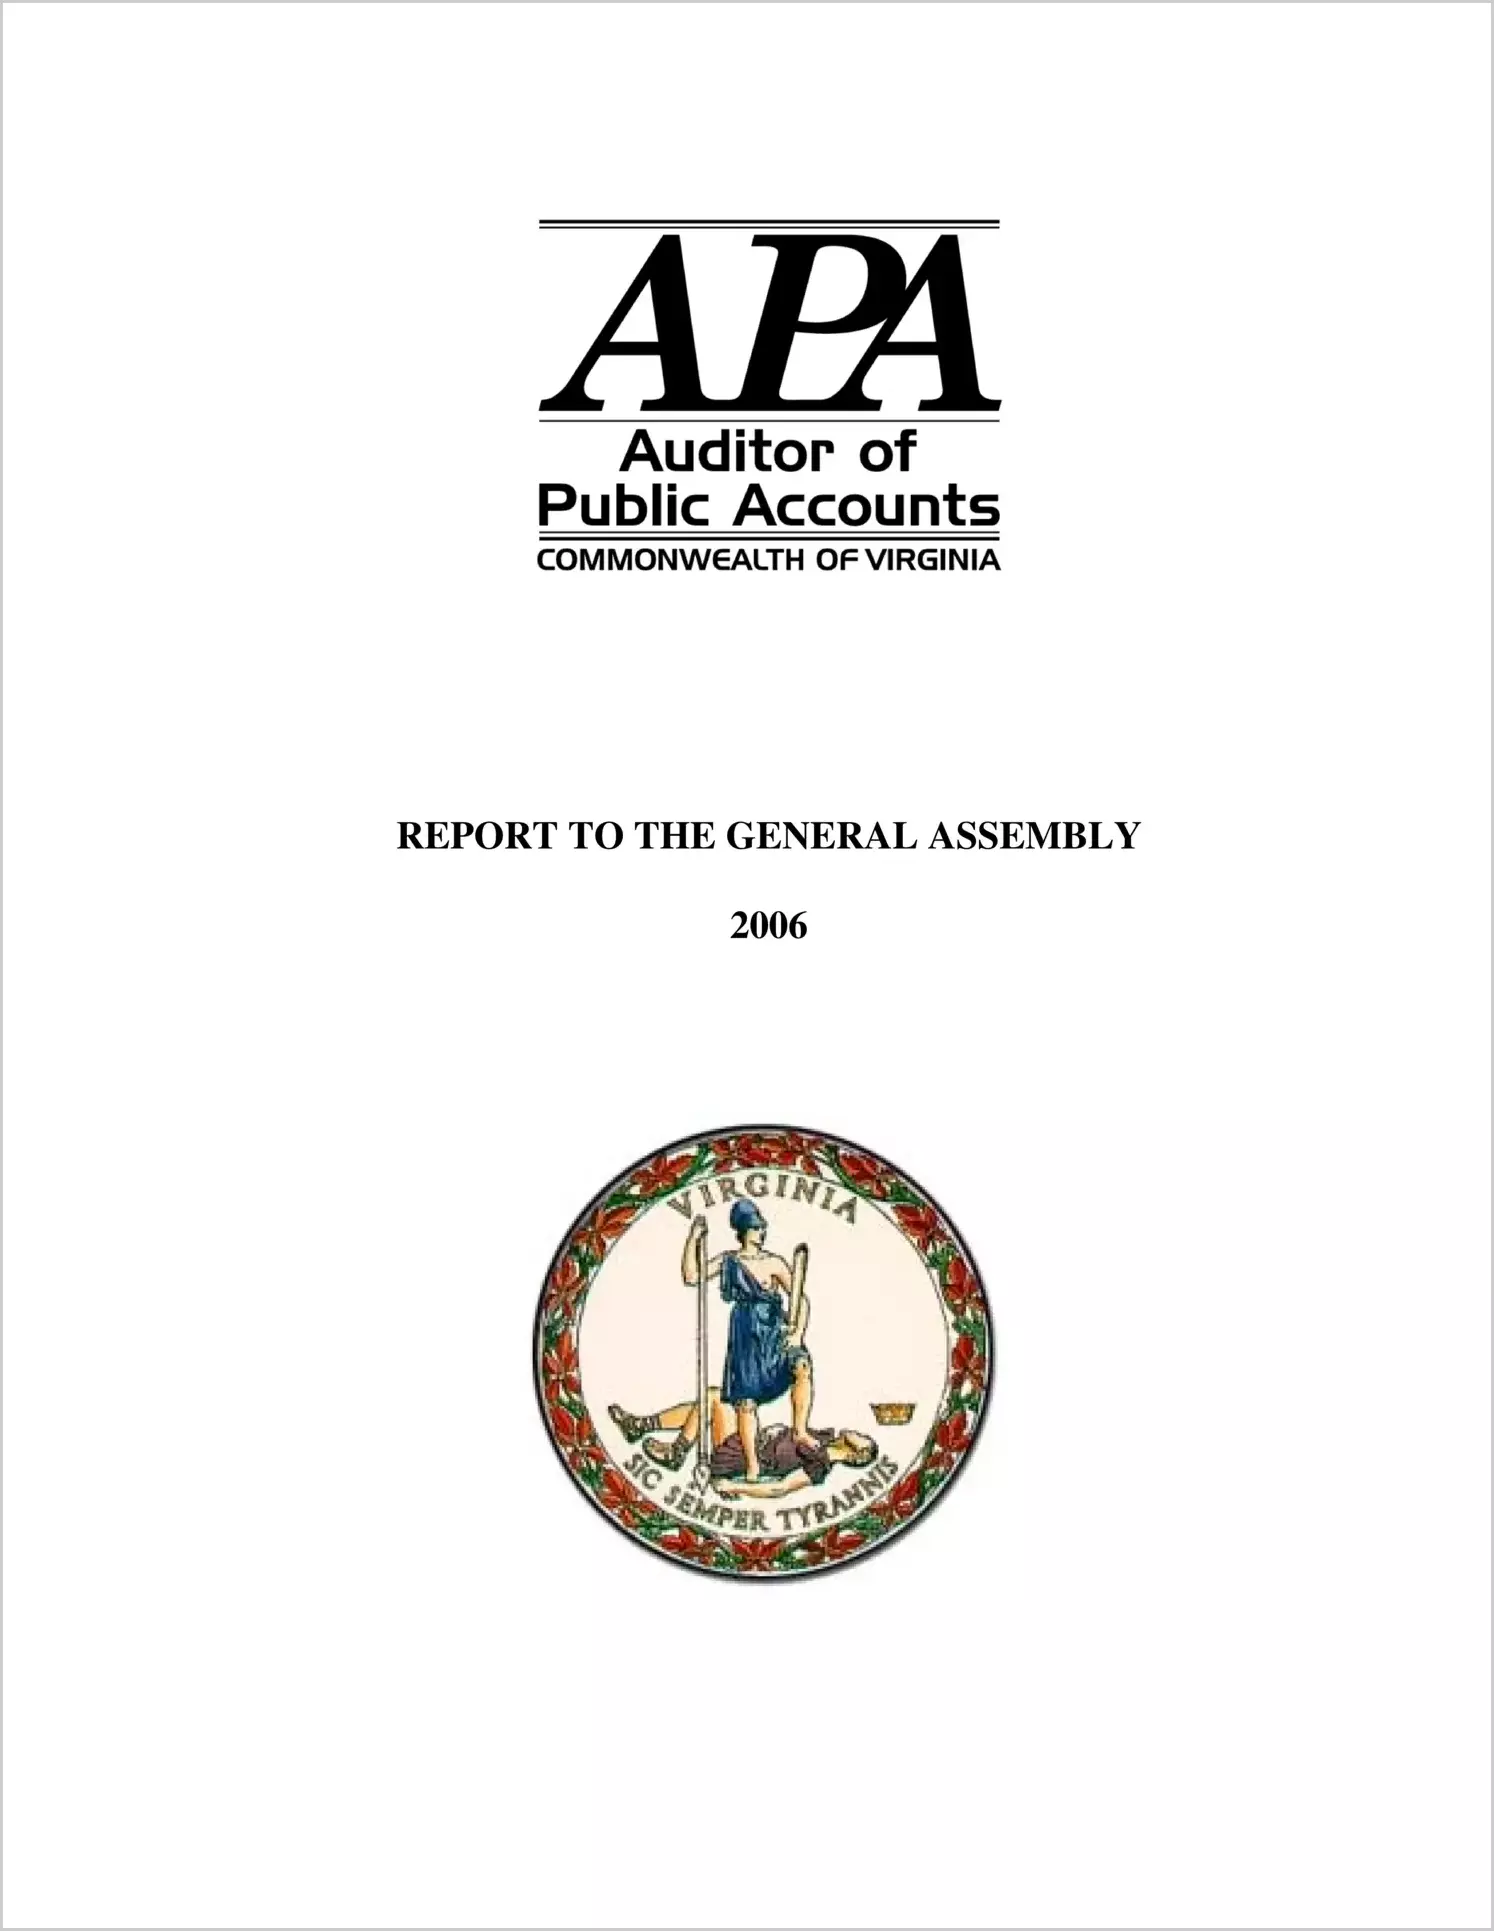 Auditor of Public Accounts Annual Report to the General Assembly for 2006